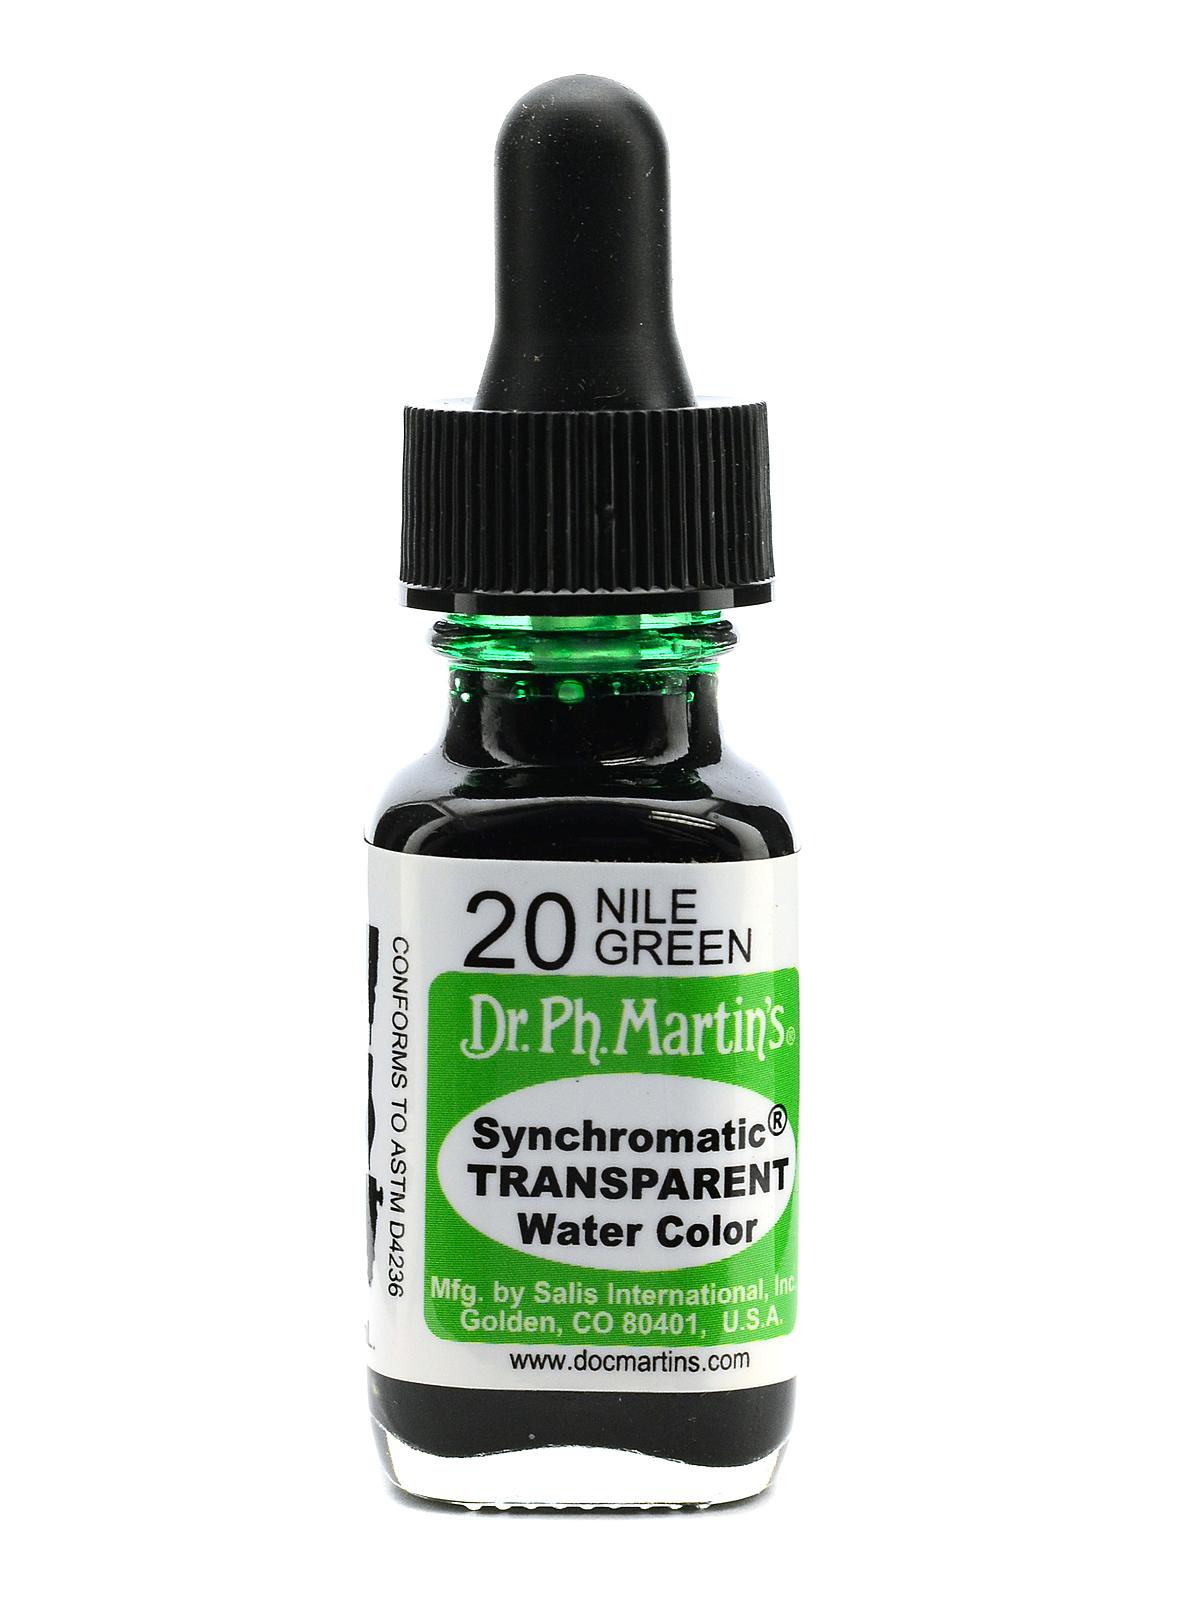 Synchromatic Transparent Watercolors 1 2 Oz. Nile Green